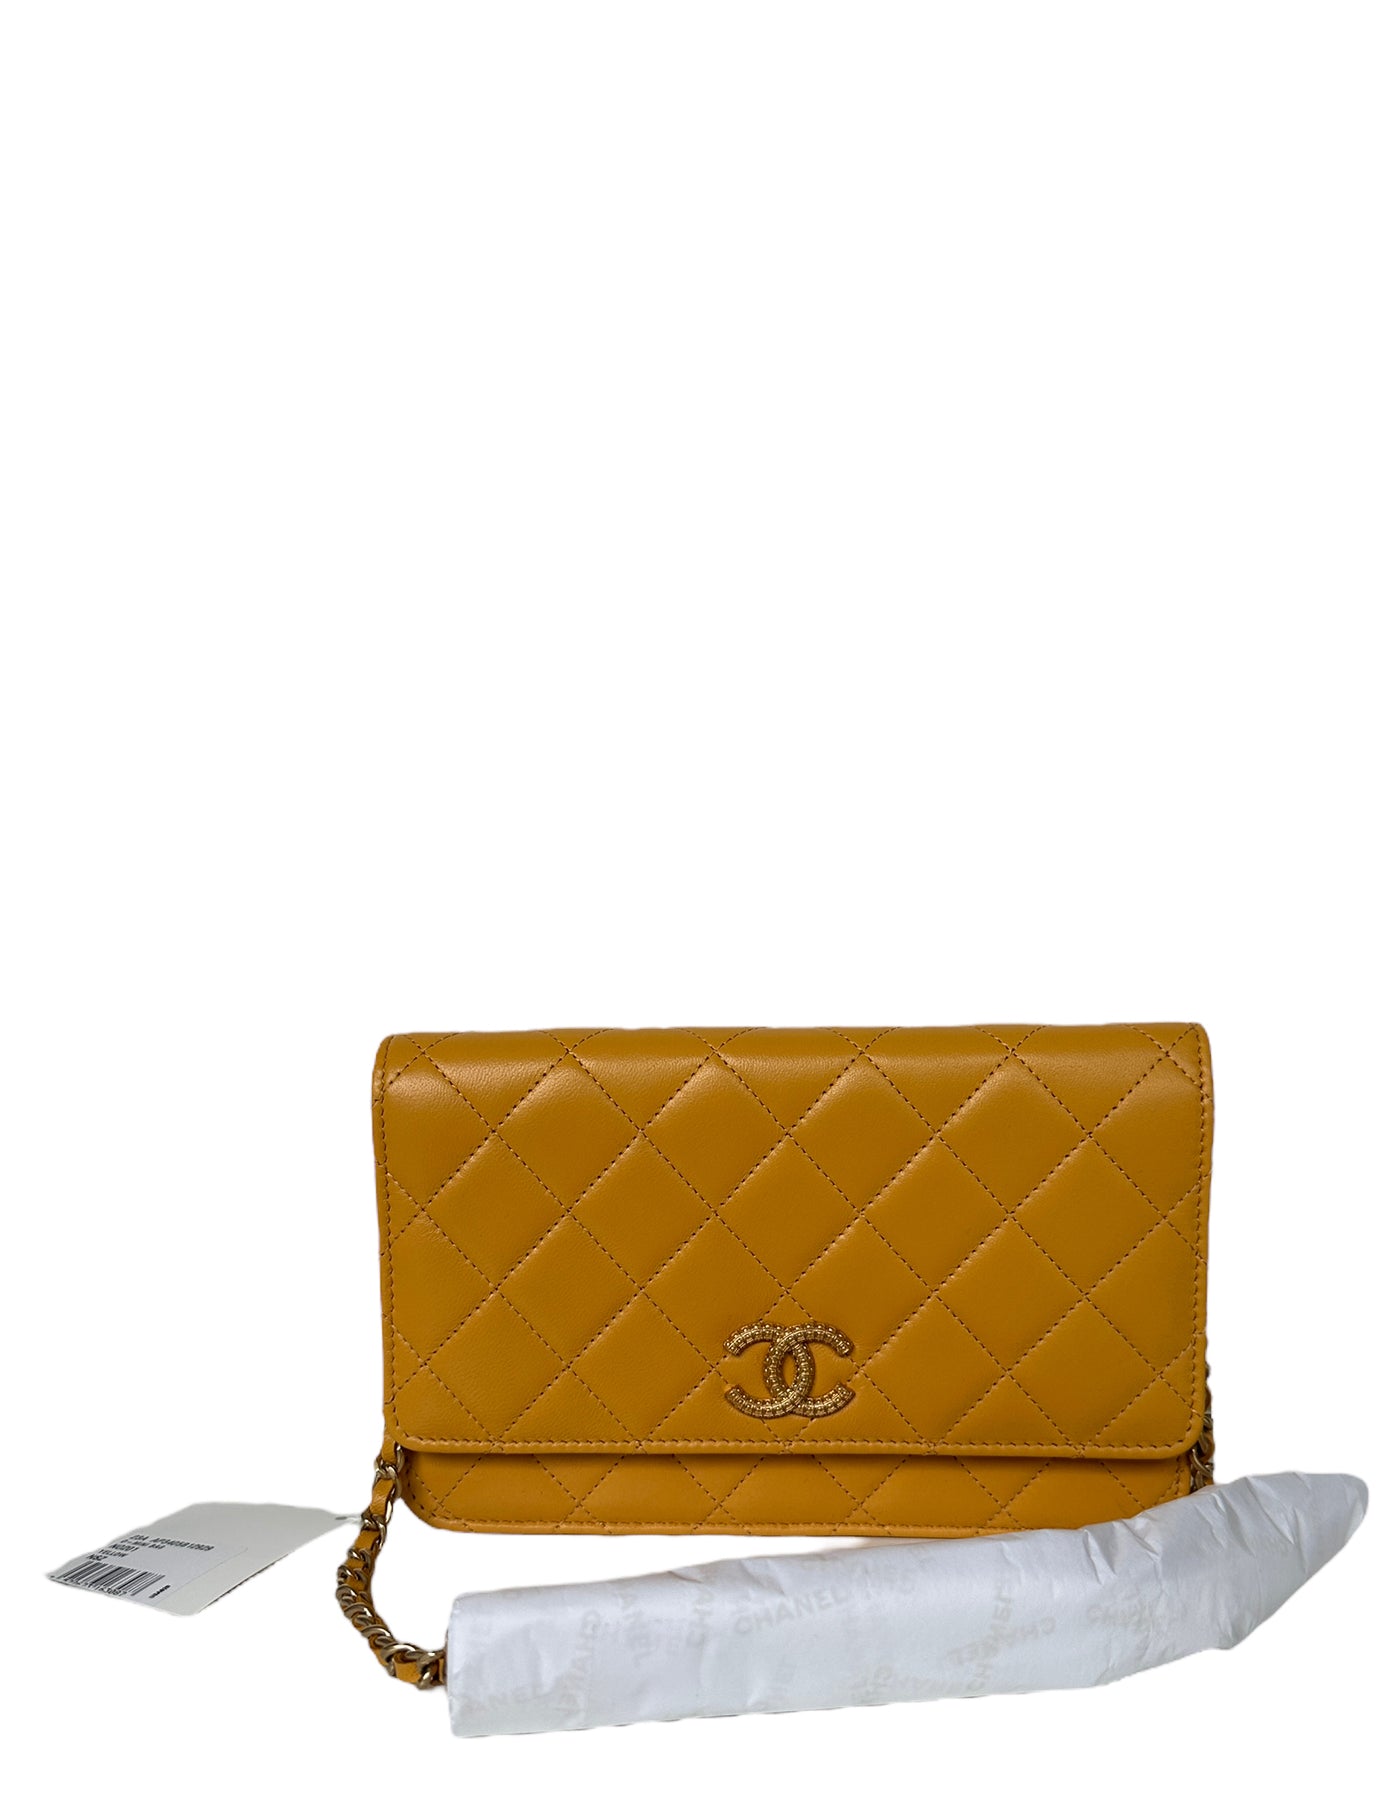 Chanel Woc Quilted Leather Crossbody Bag